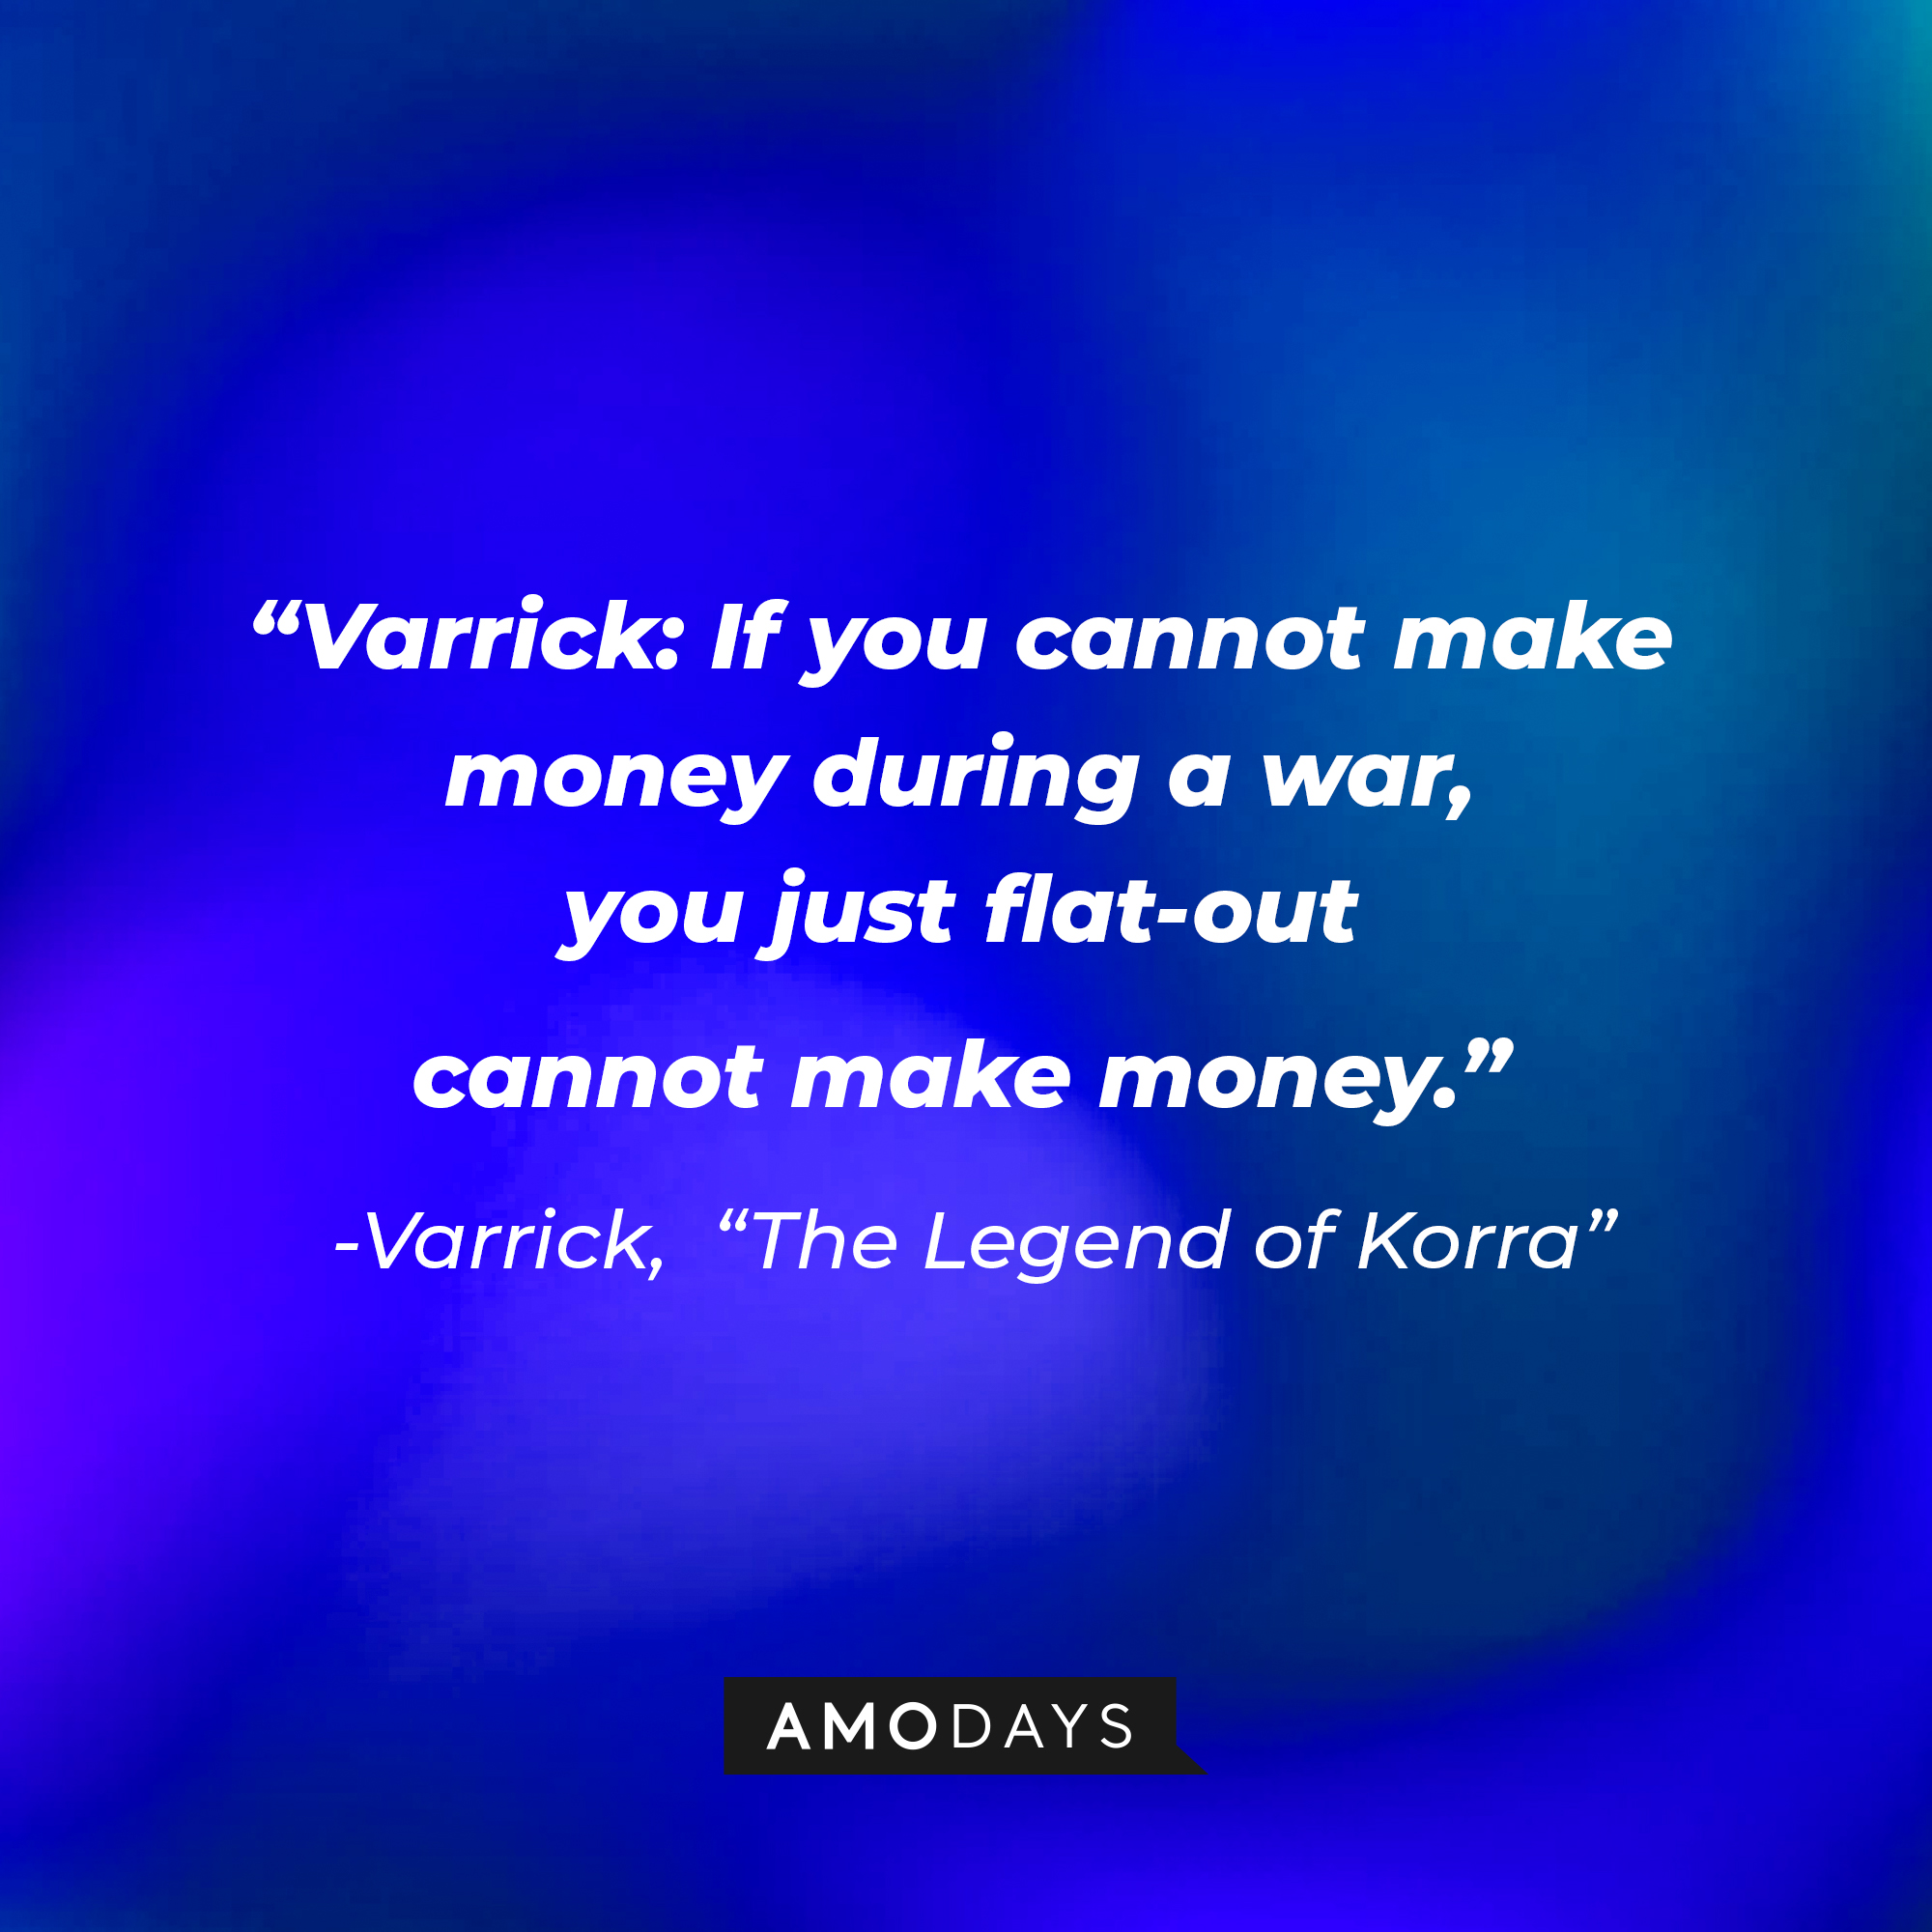 Varrick’s quote in “Avatar: The Legend of Korra:” “If you cannot make money during a war, you just flat-out cannot make money." | Source: Amodays